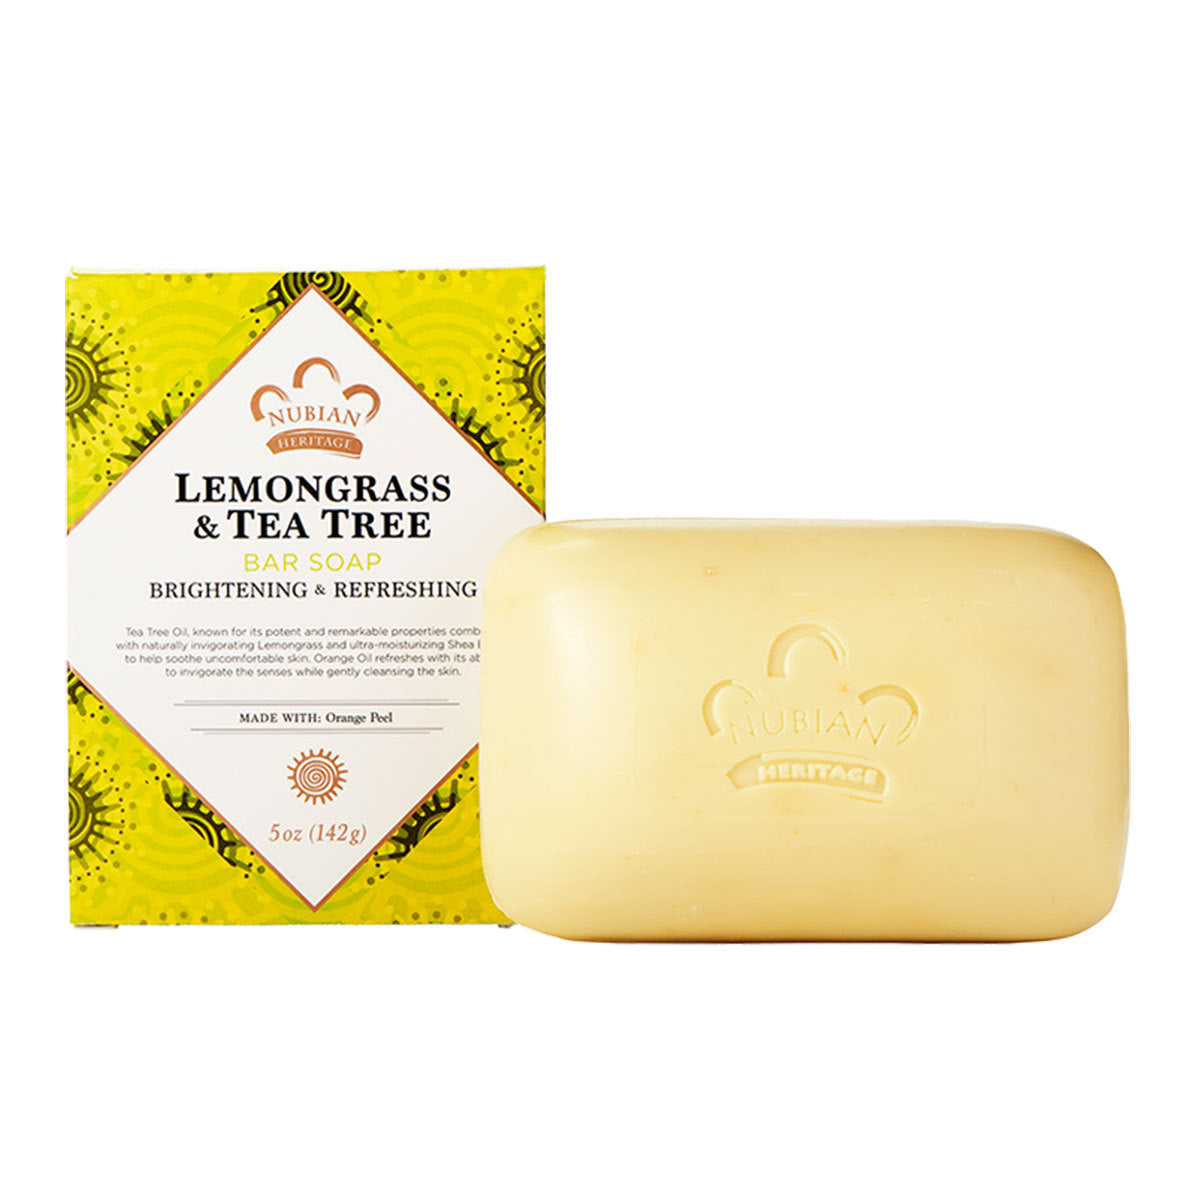 Primary image of Lemongrass and Tea Tree Soap